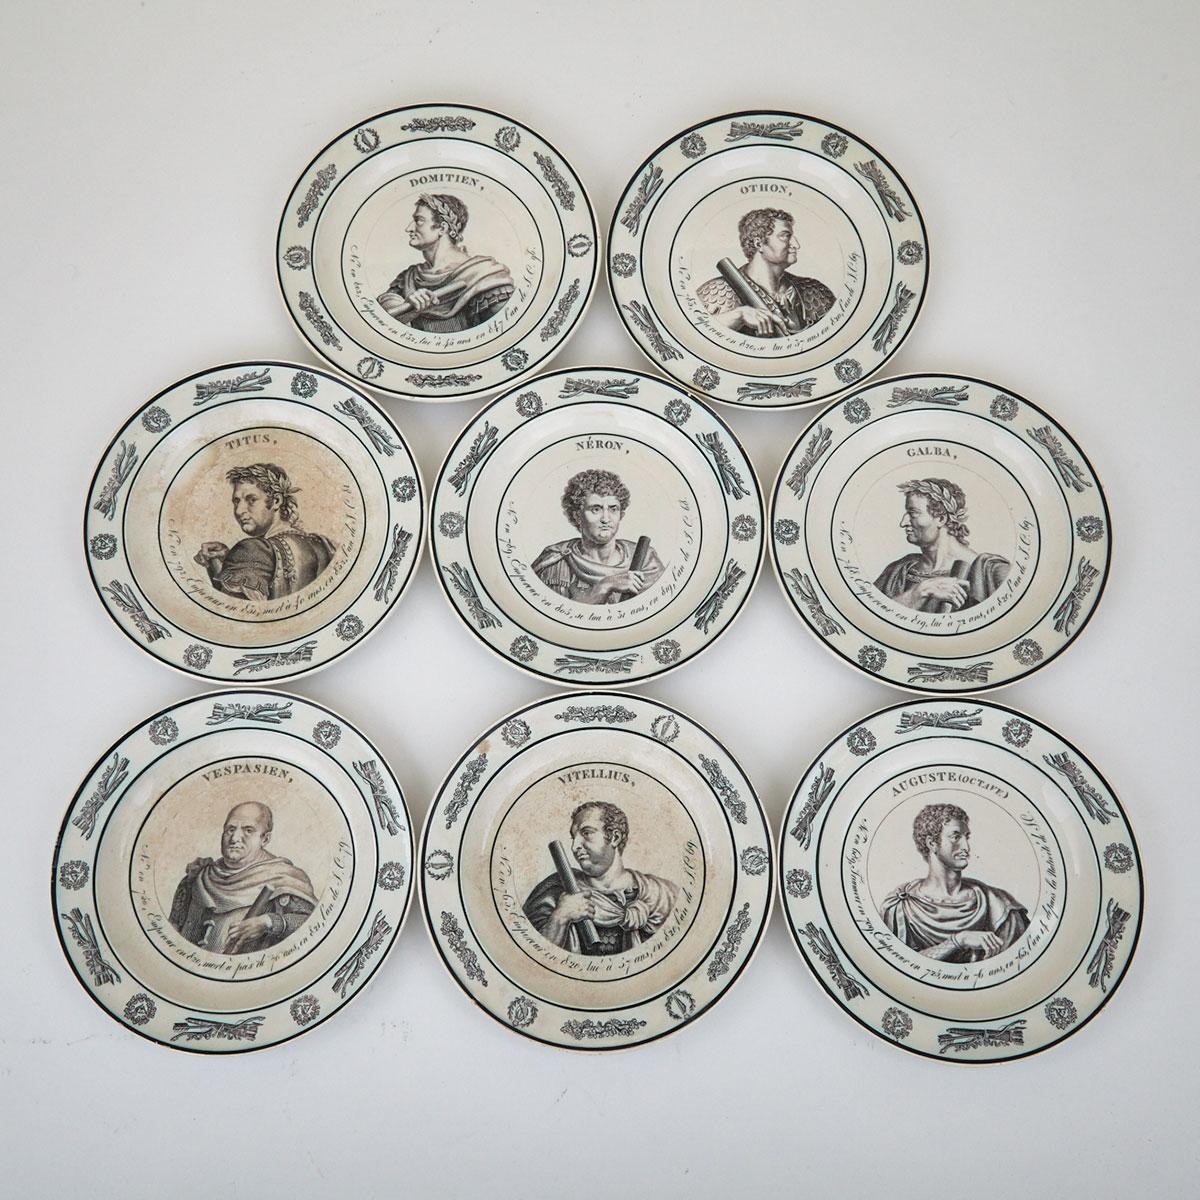 Group of Eight French Pearlware Plates Depicting Roman Emperors, 19th Century